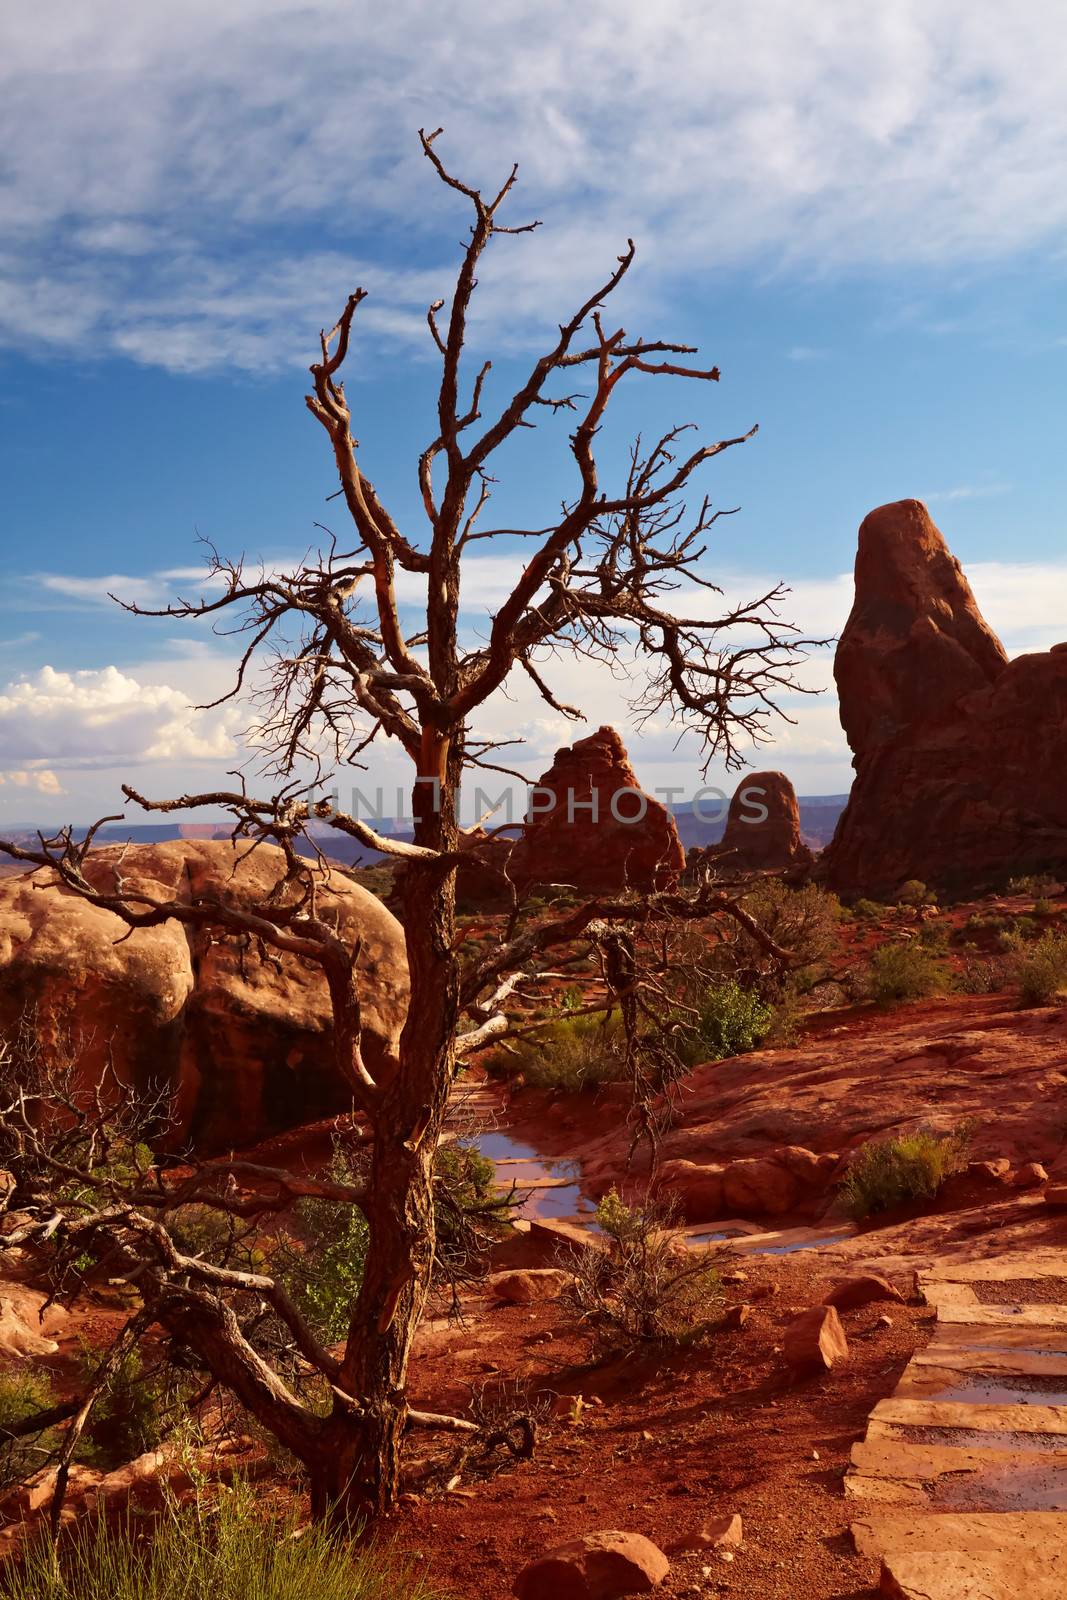 Desert after the Storm, Arches National Park, Utah, USA